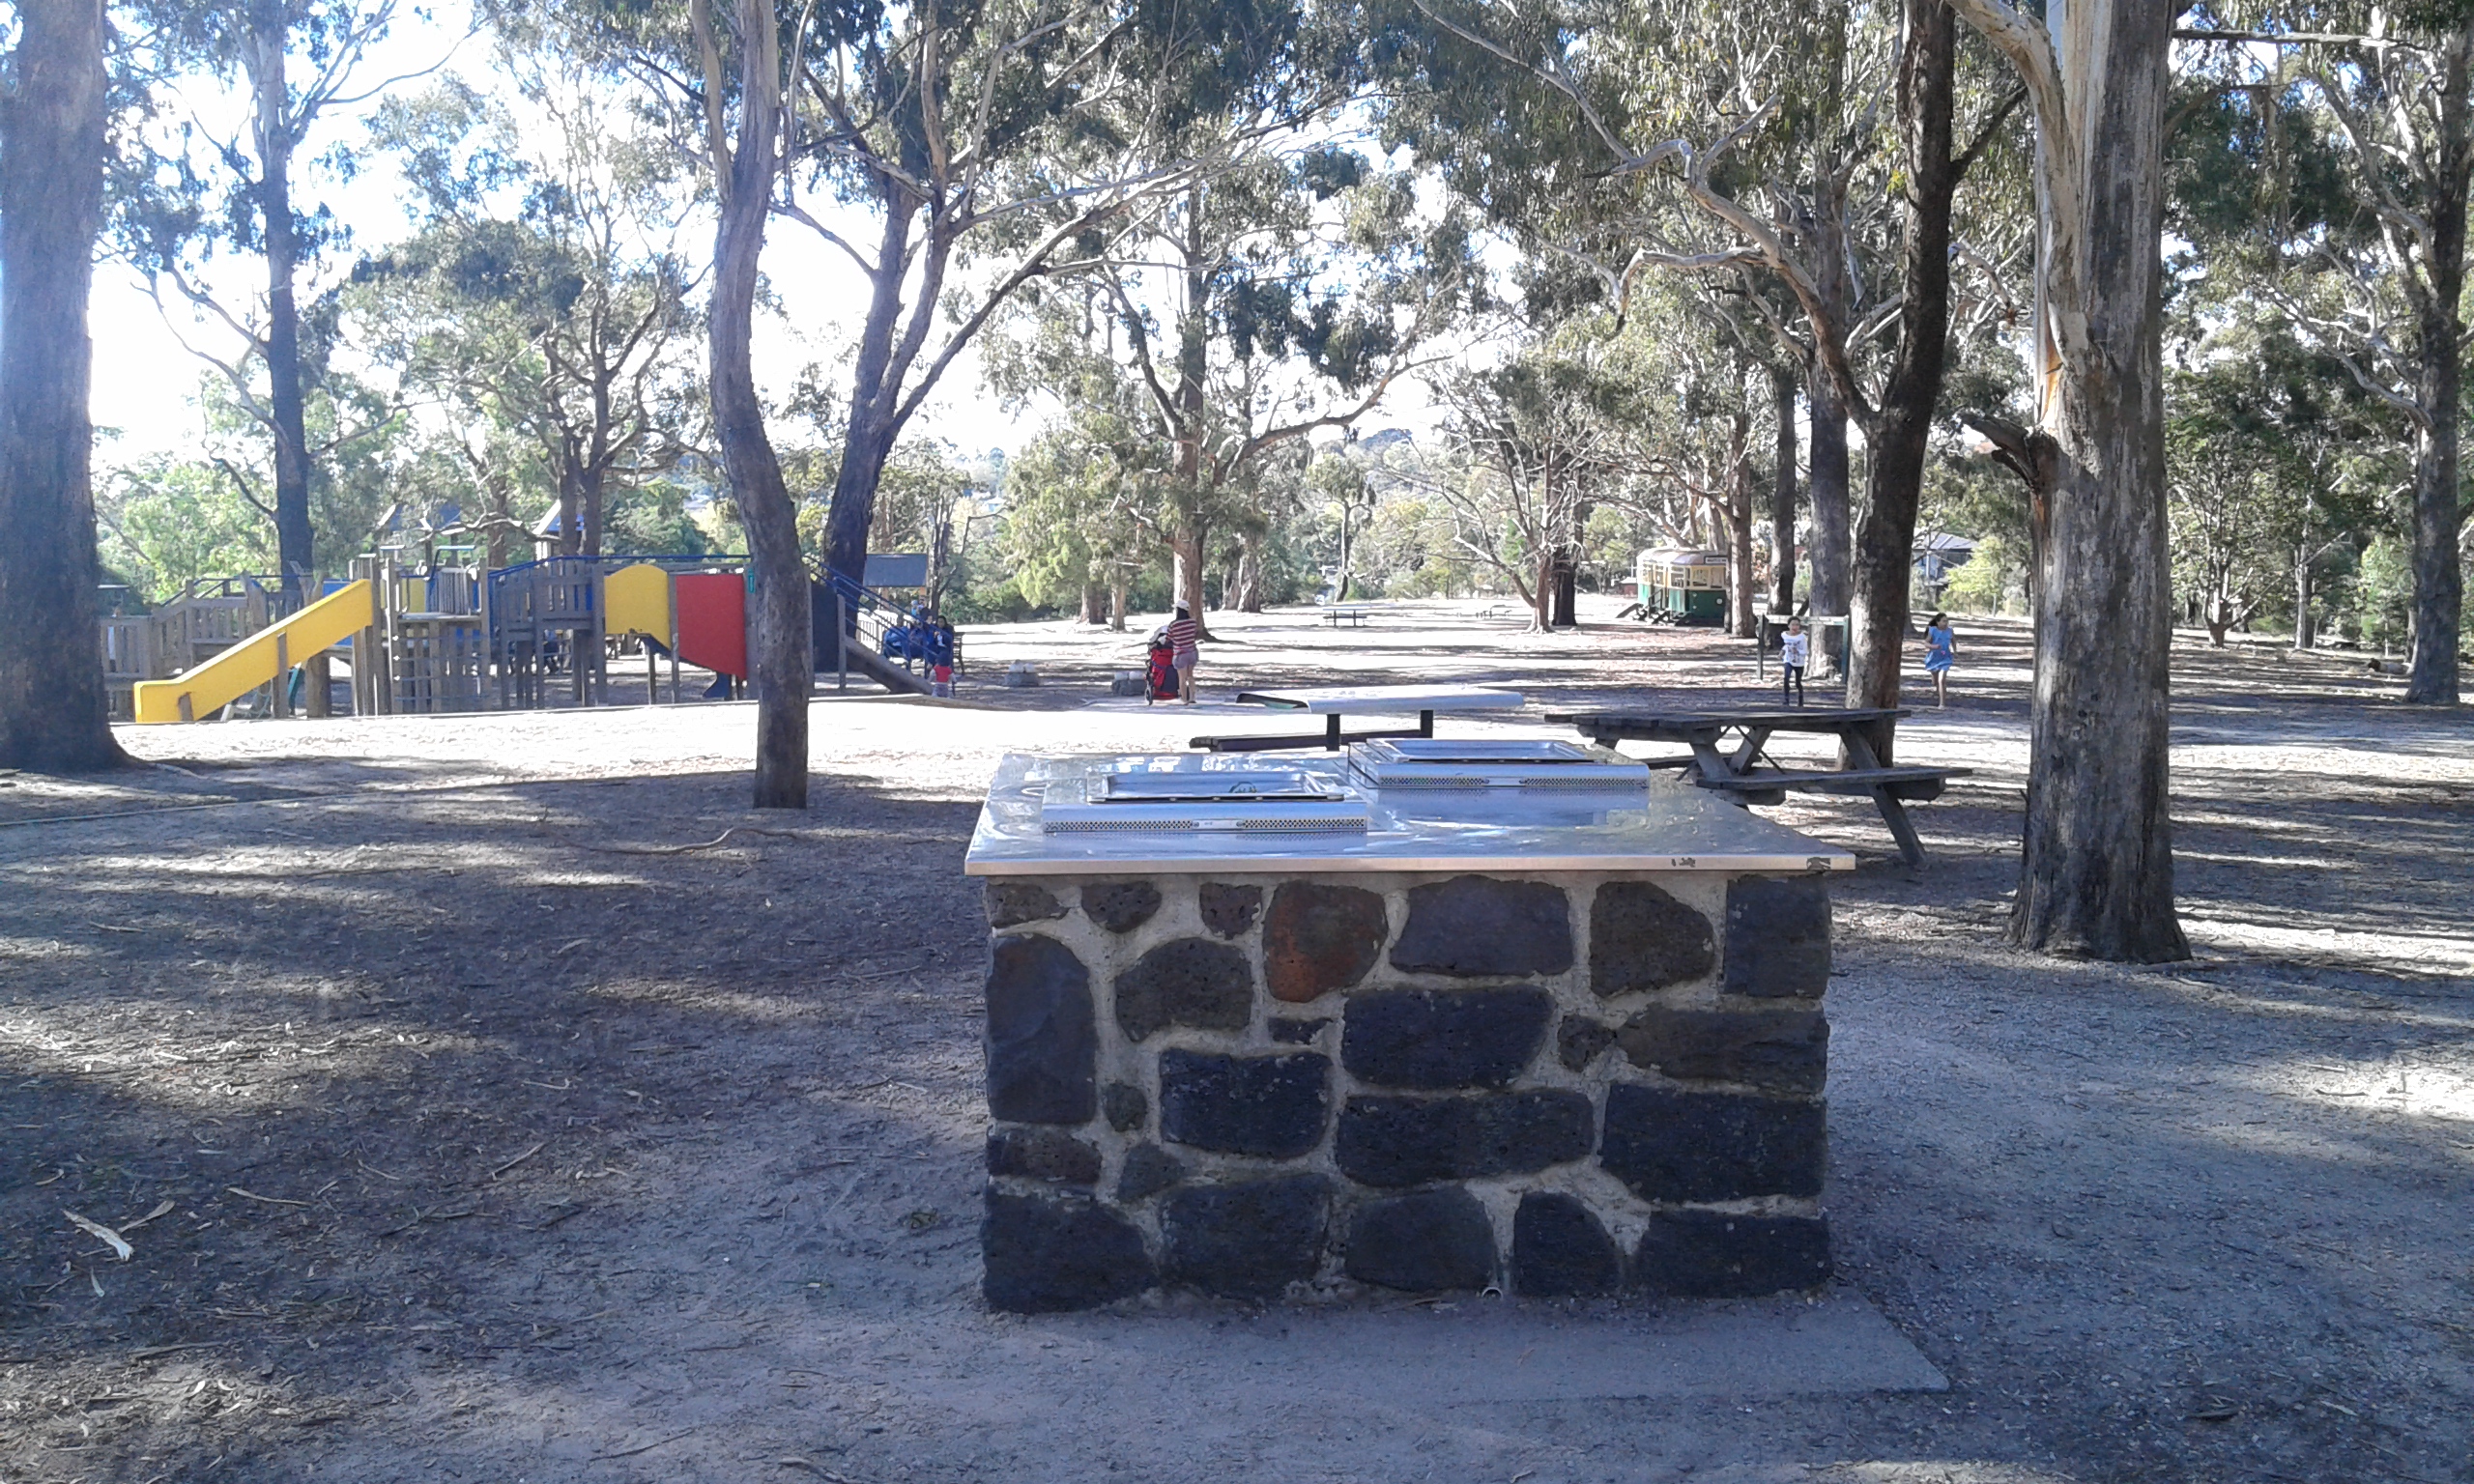 Barbecue in Wattle Park